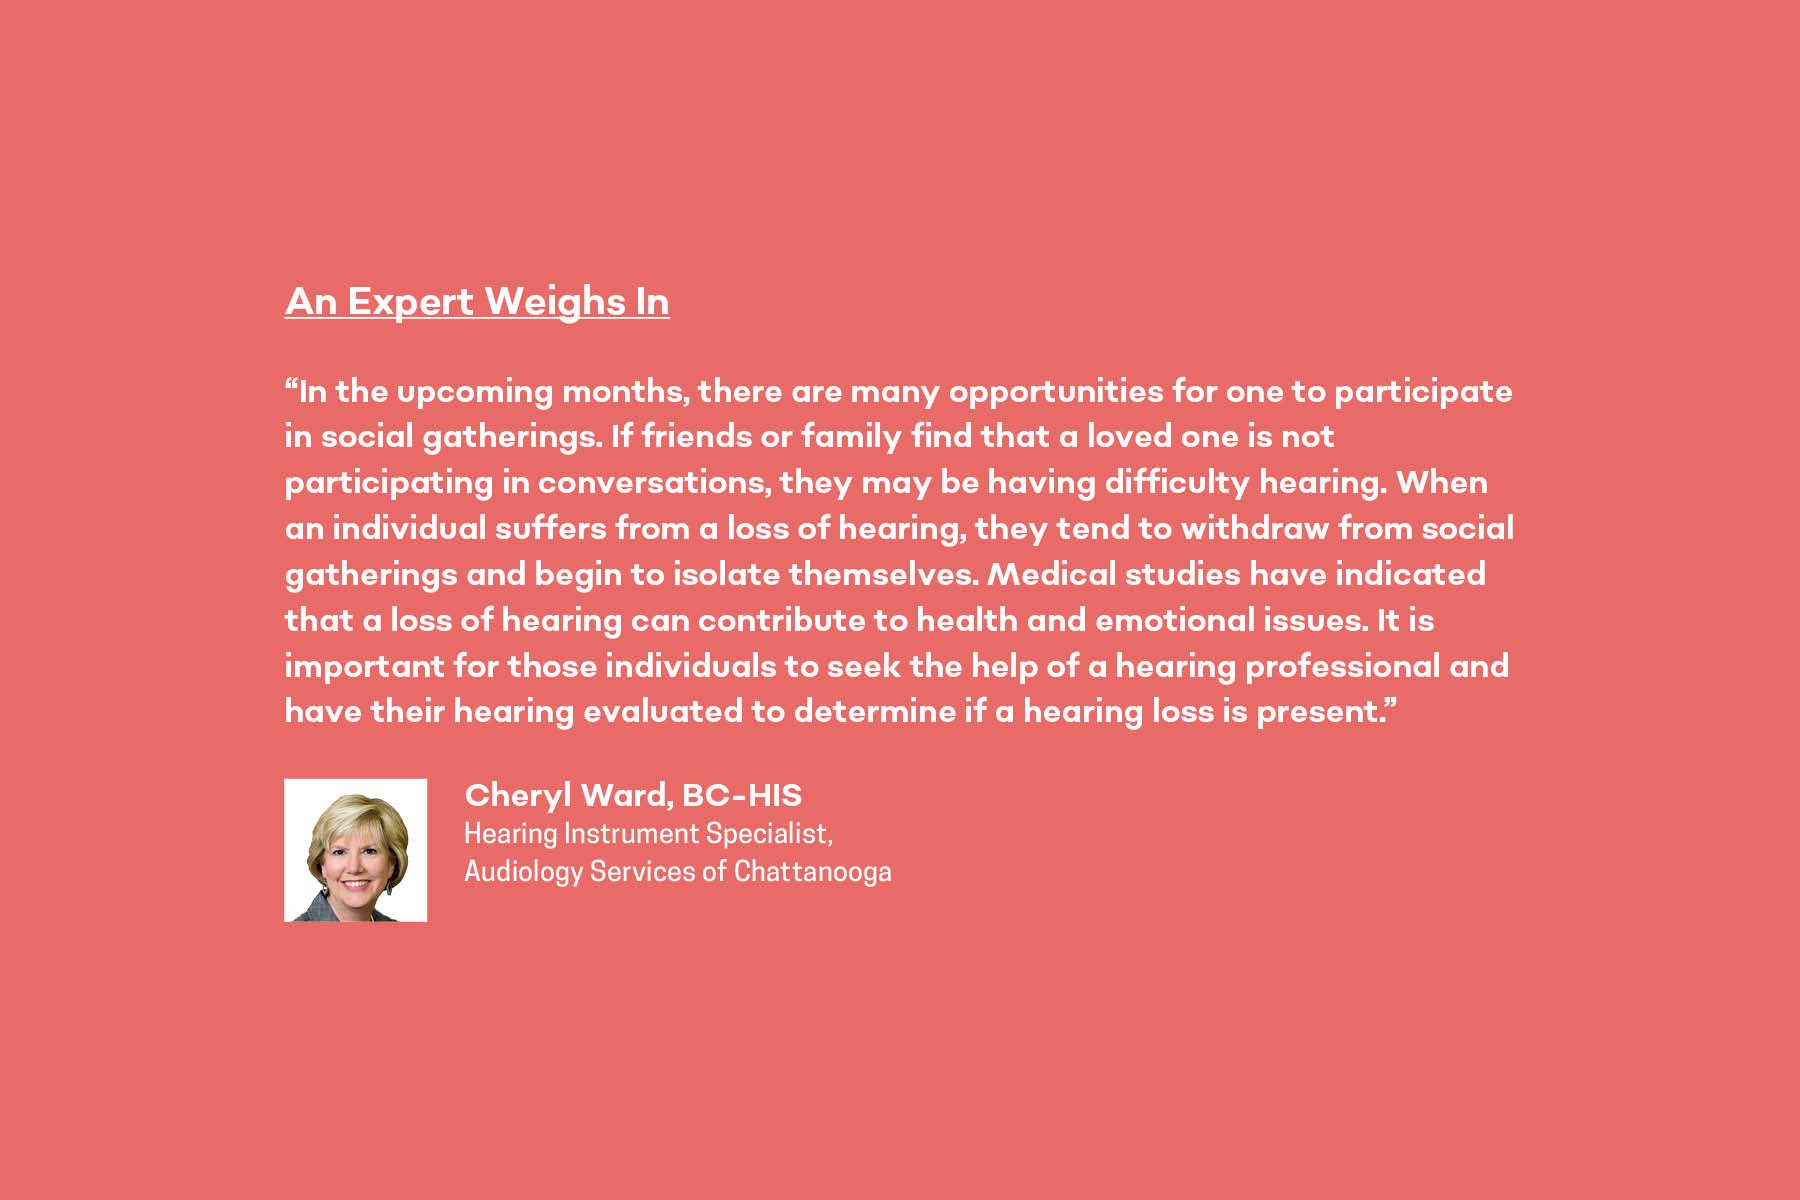 expert opinion on the effects of untreated hearing loss from Cheryl Ward, BC-HIS at Audiology Services of Chattanooga of untreated hearing loss 